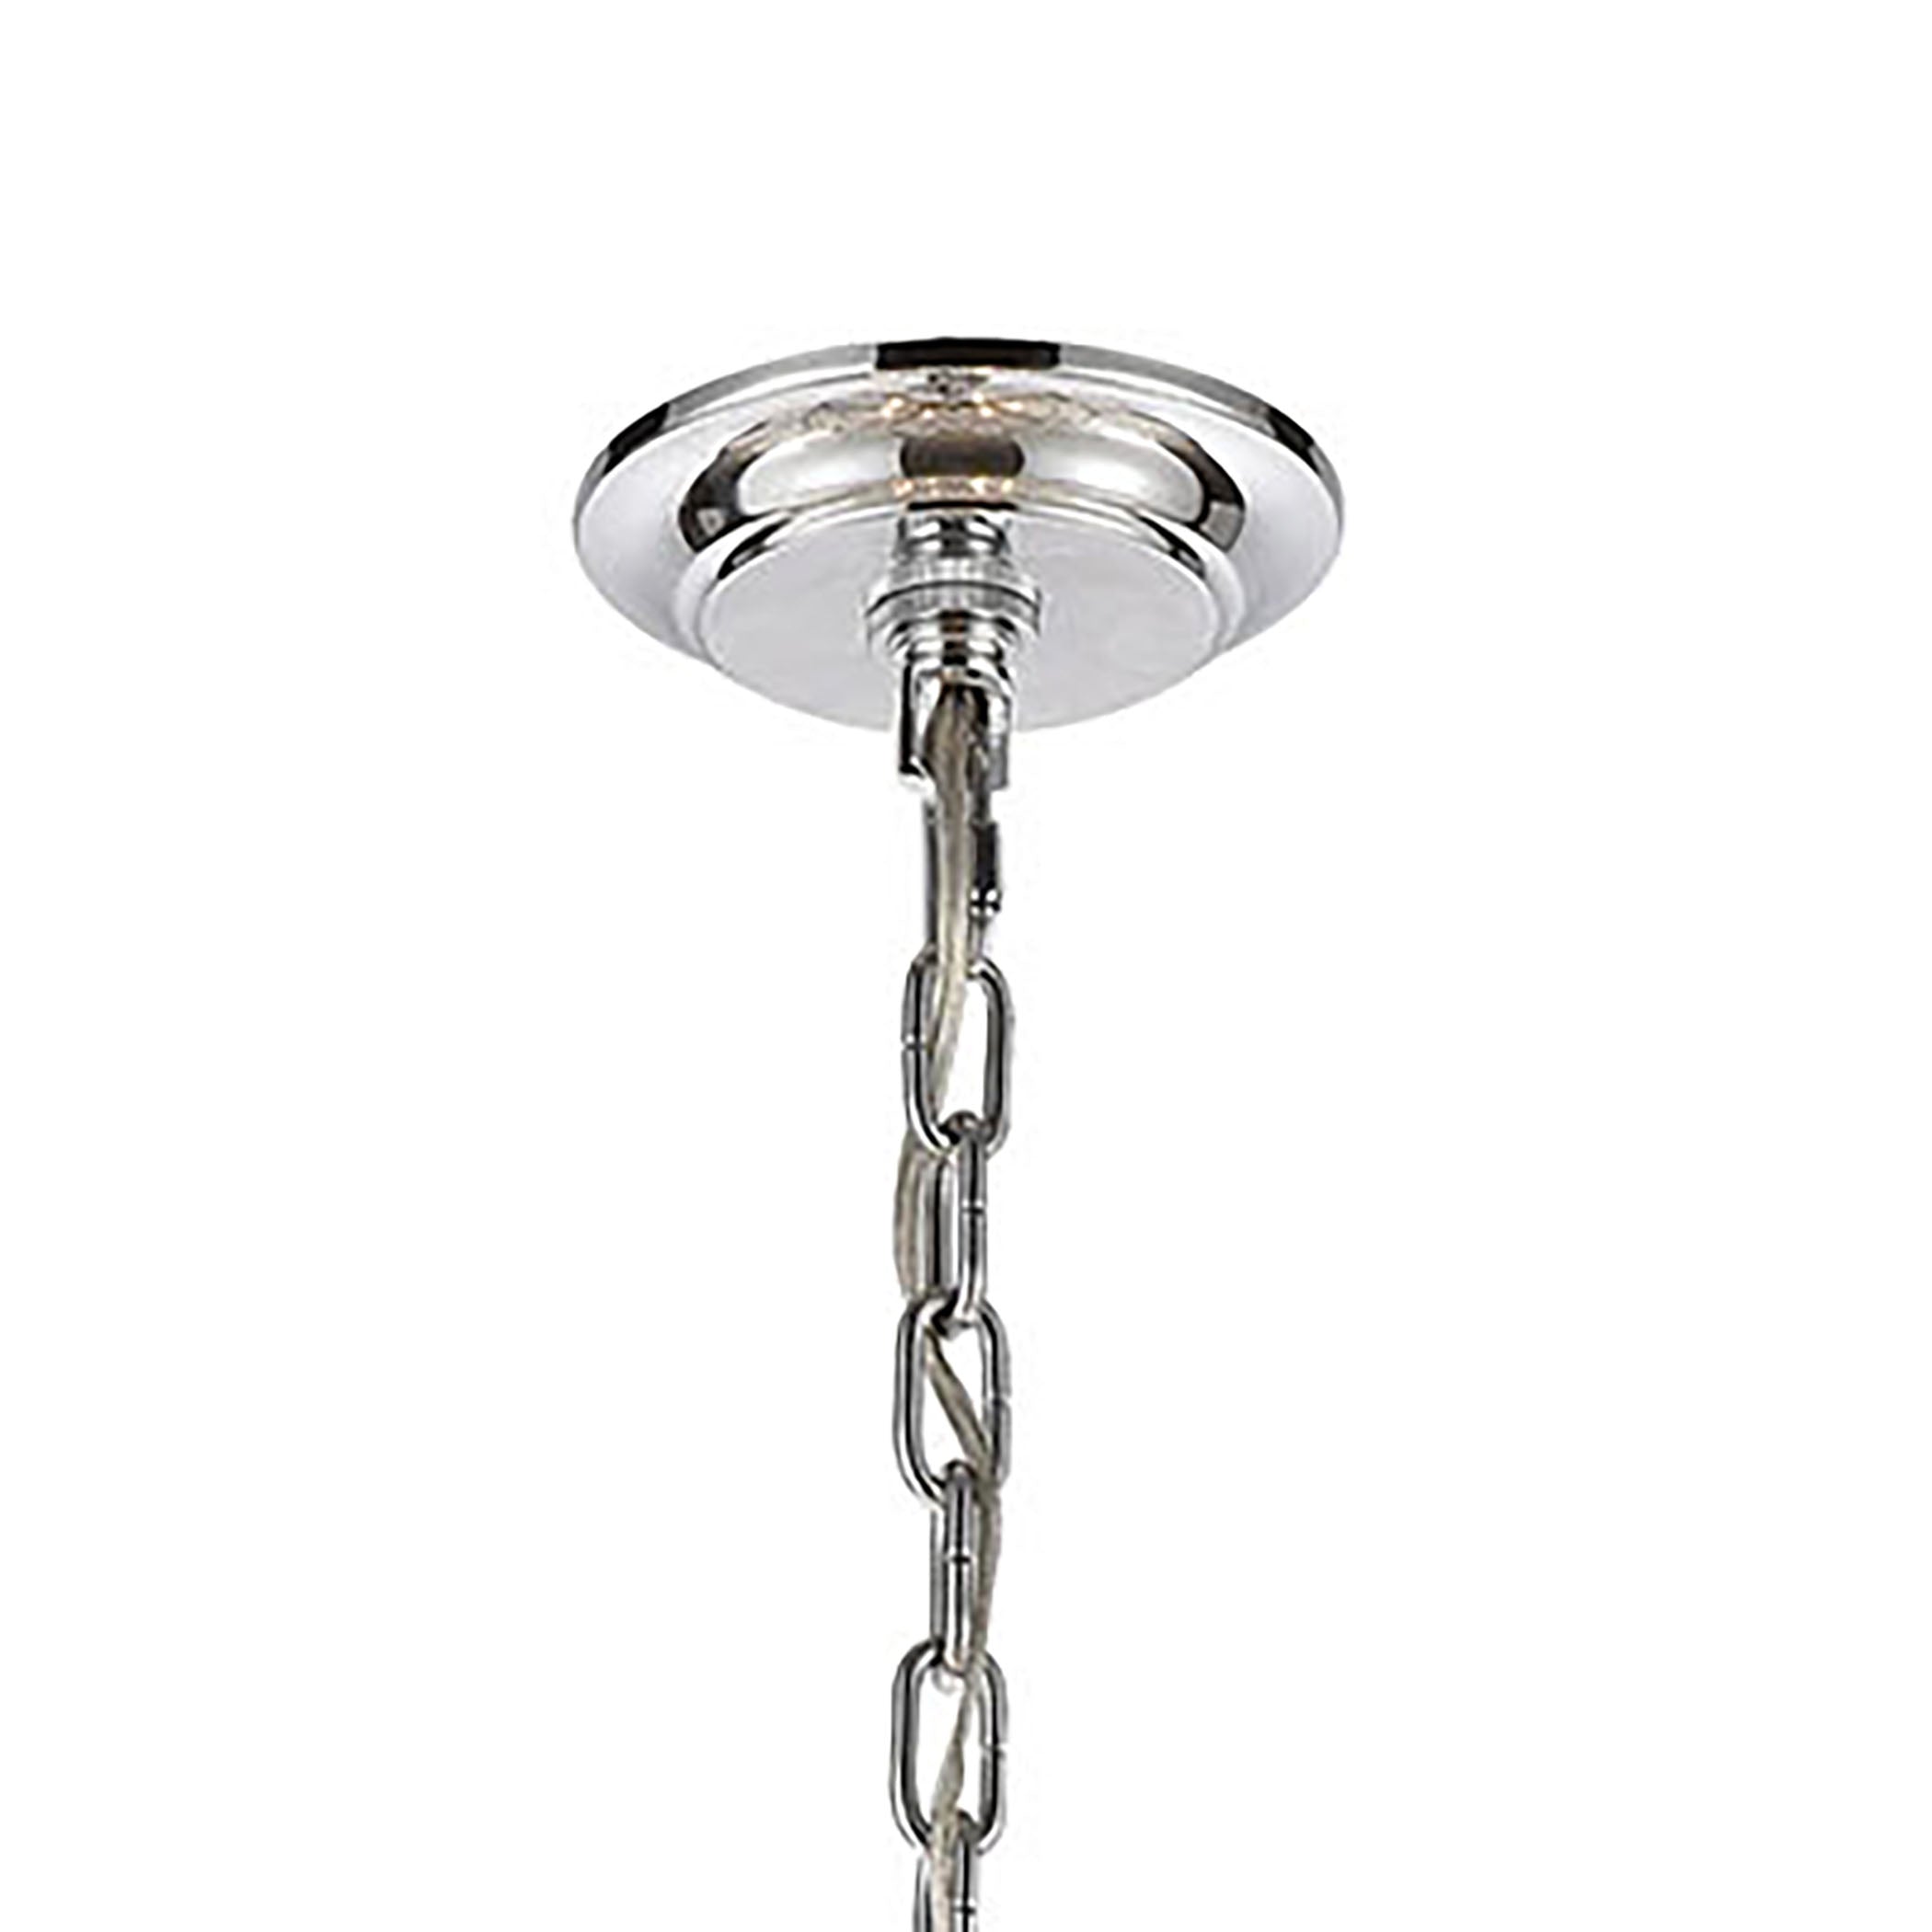 ELK Lighting 32446/13 Frozen Cascade 13-Light Chandelier in Polished Chrome with Clear Textured Glass